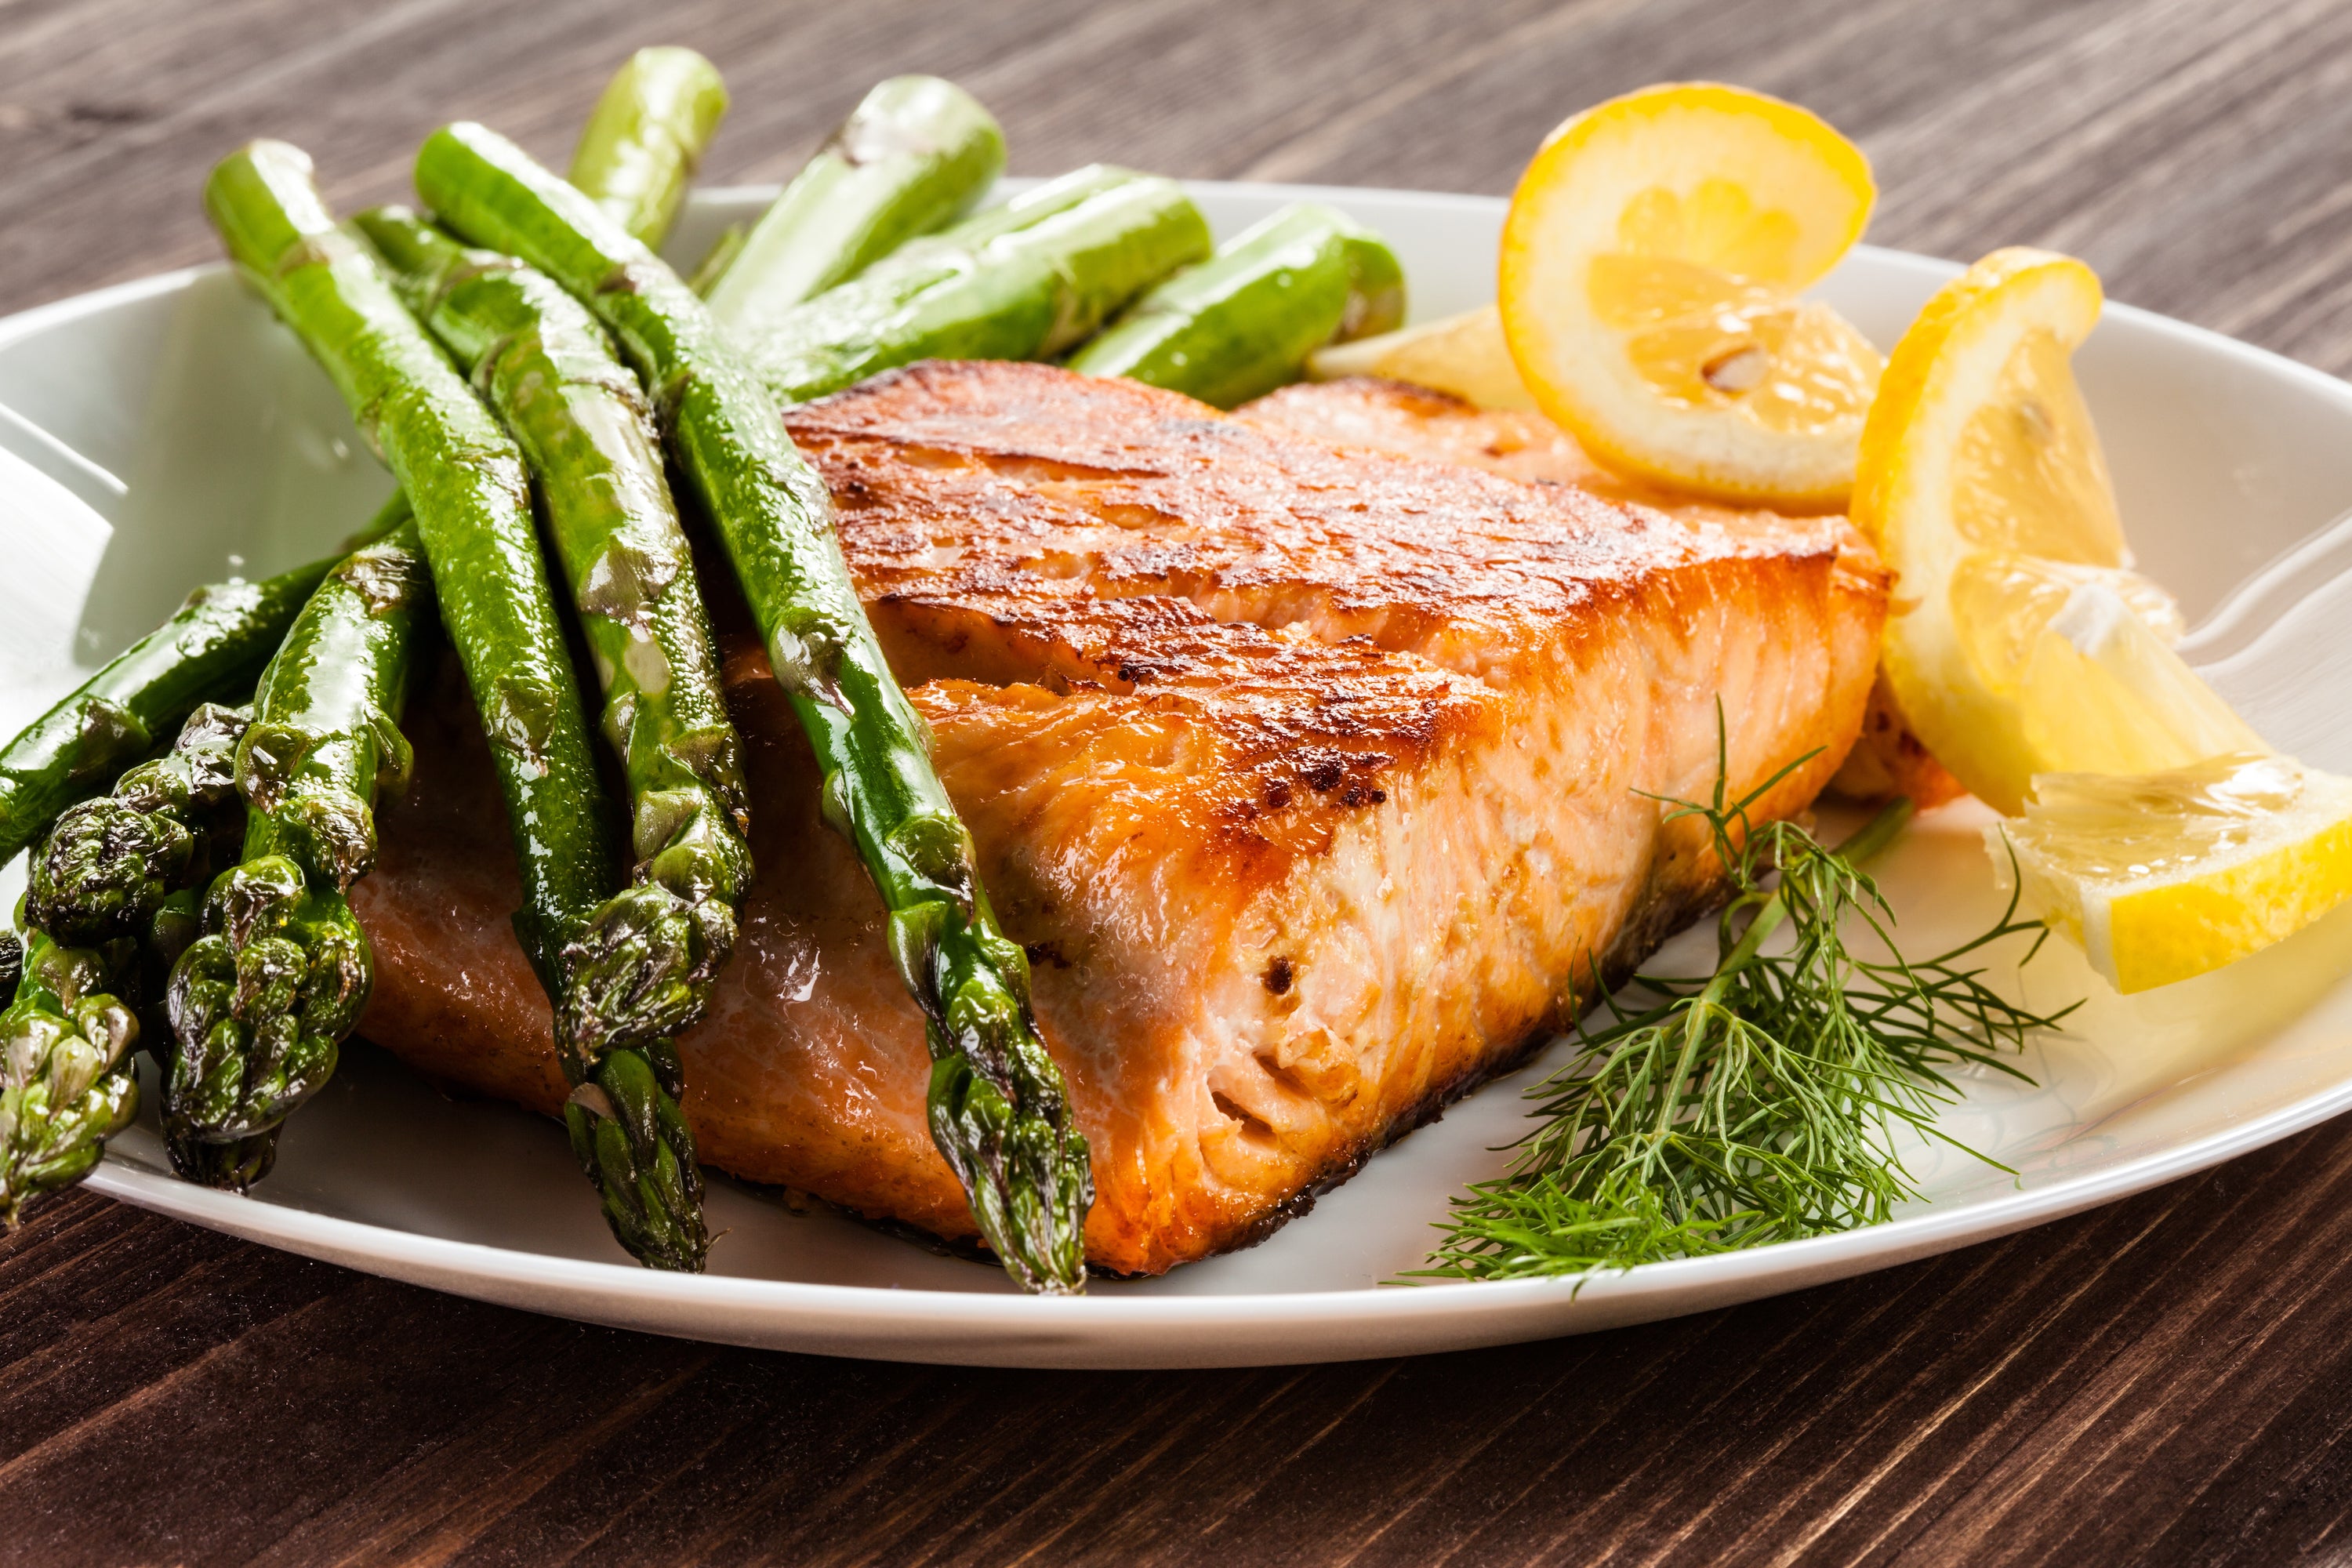 grilled salmon on plate with asparagus and lemon garnish